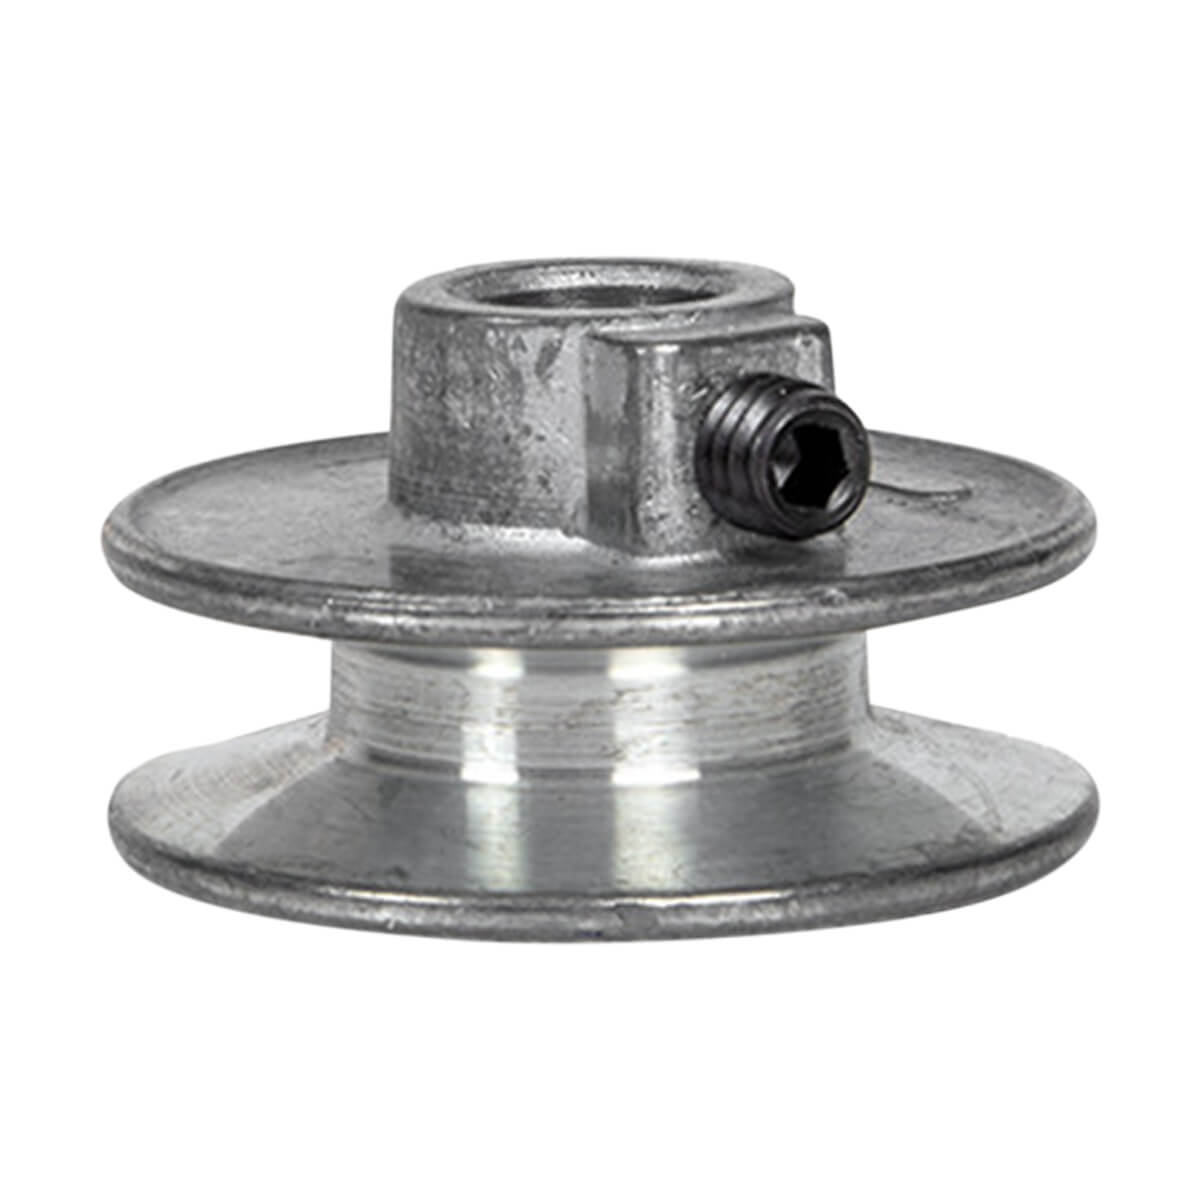 Aluminum Pulley for A-Belts - 2 1/4-in x 5/8-in